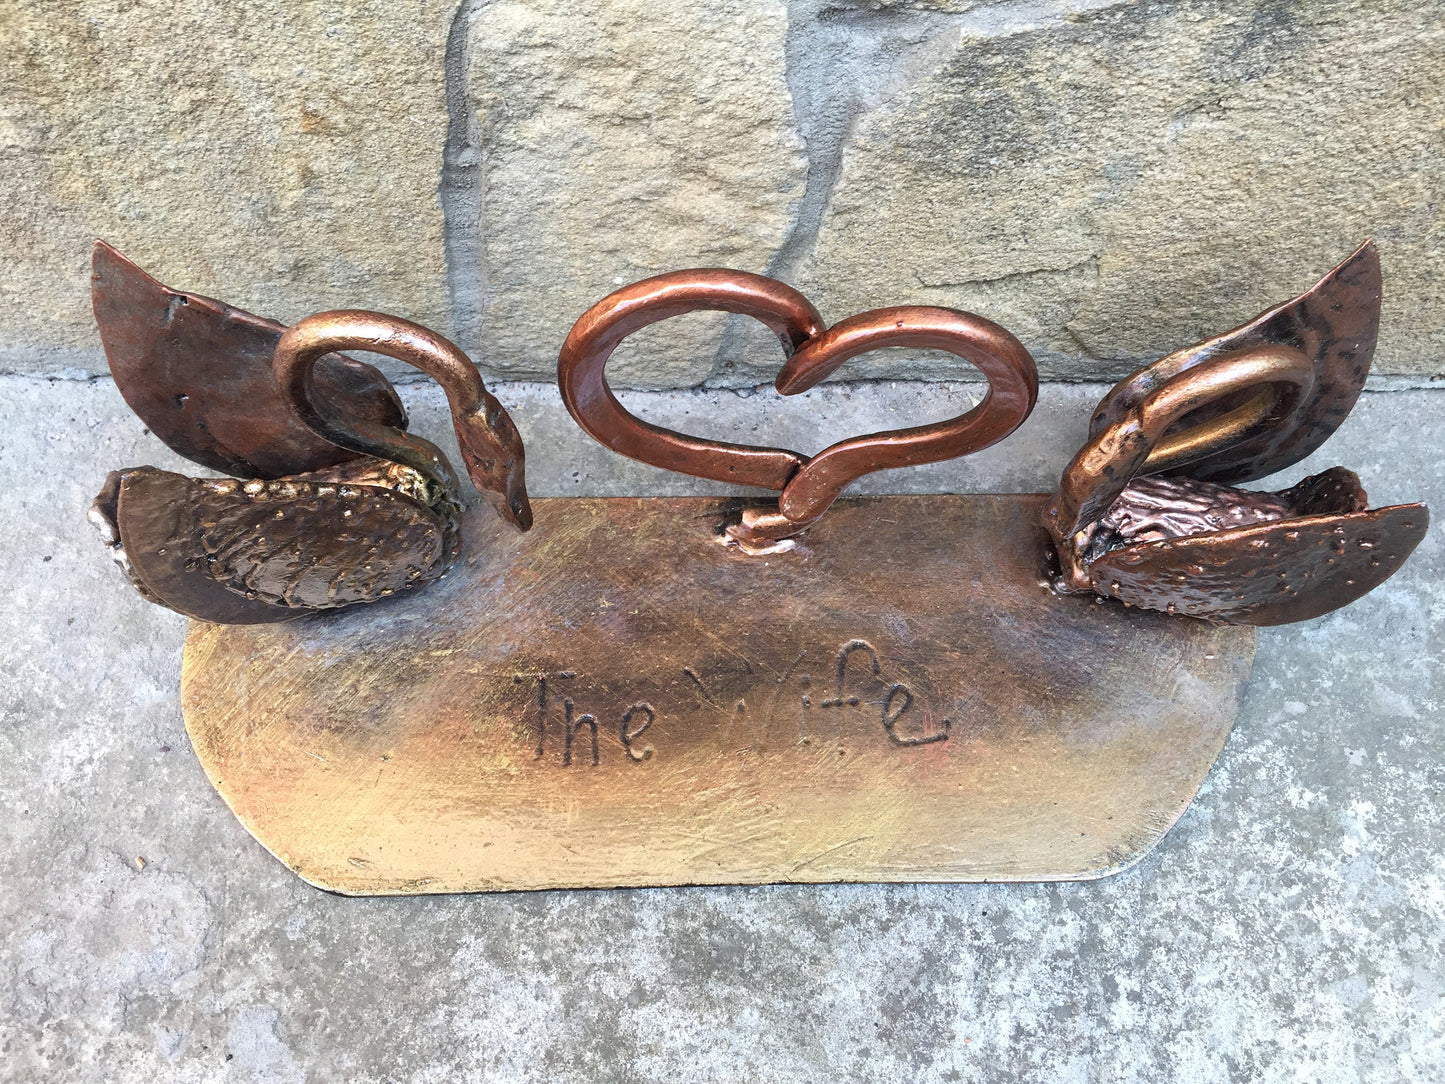 Iron swans, 6th anniversary gift, 6 year anniversary, iron anniversary, anniversary gift, iron gifts, love sign, viking axe, steampunk